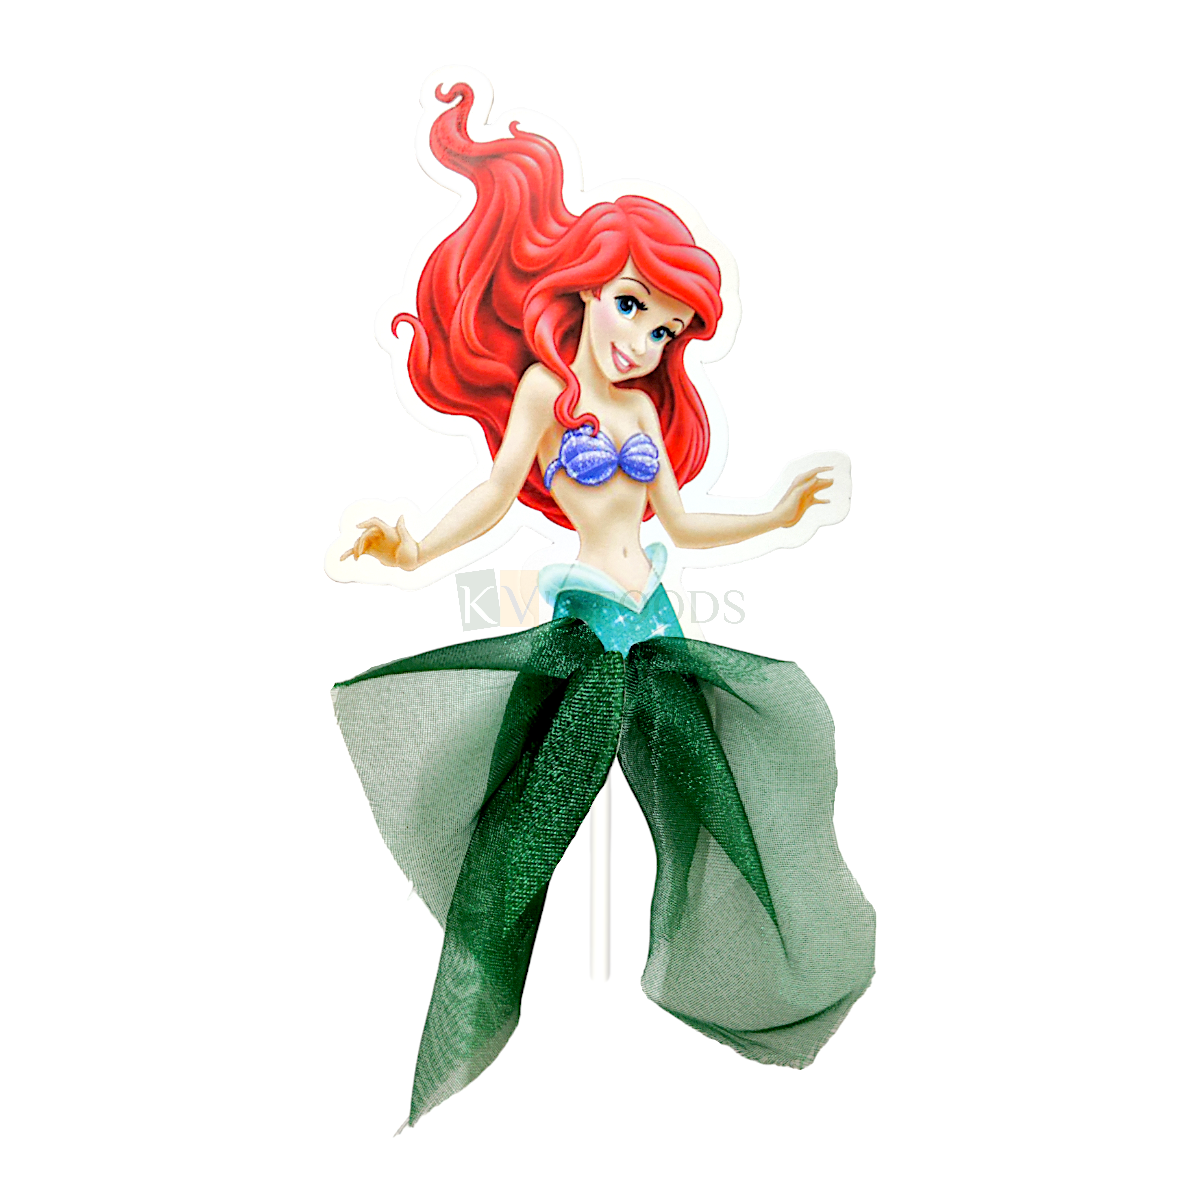 1 PC Green Disney Princess Athiraa Ariel The Little Mermaid Net Skirt Girl Lady Women Paper Cake Topper for Bride Wedding, Mother's Day, Women's Day Theme, Pull Me Up Doll Cakes Daughters Birthday